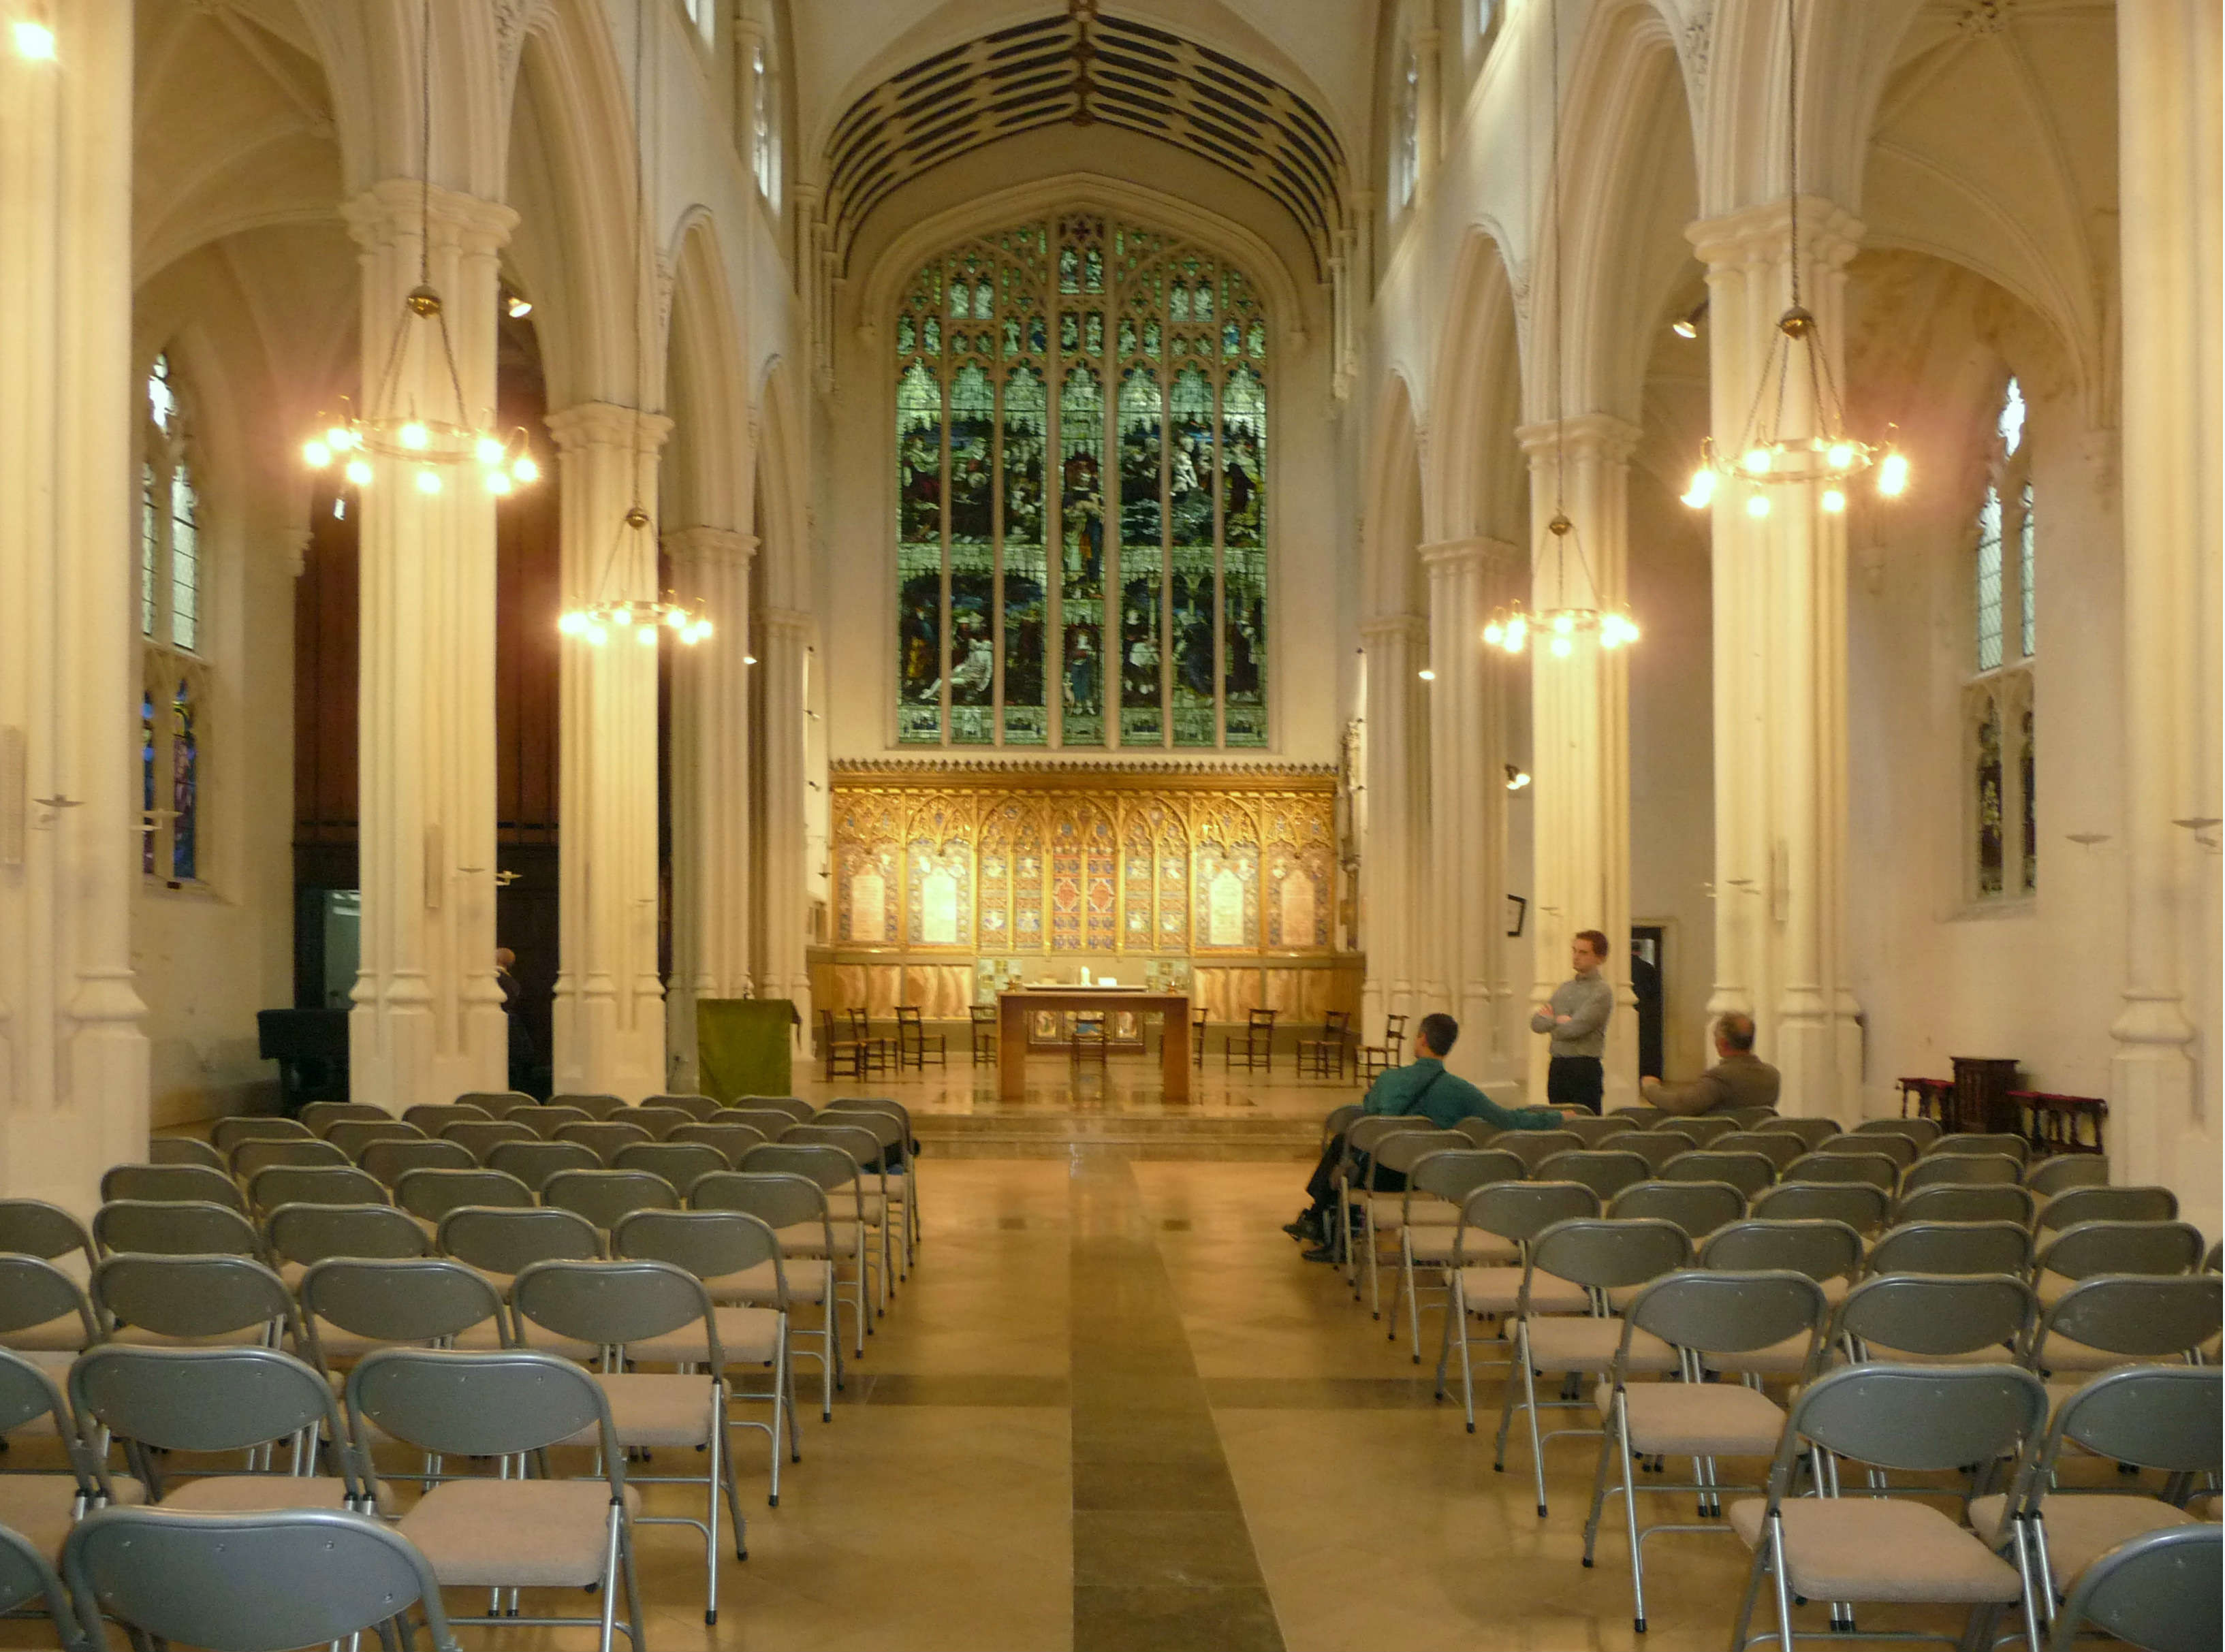 Image: St John's Hyde Park: view of the nave